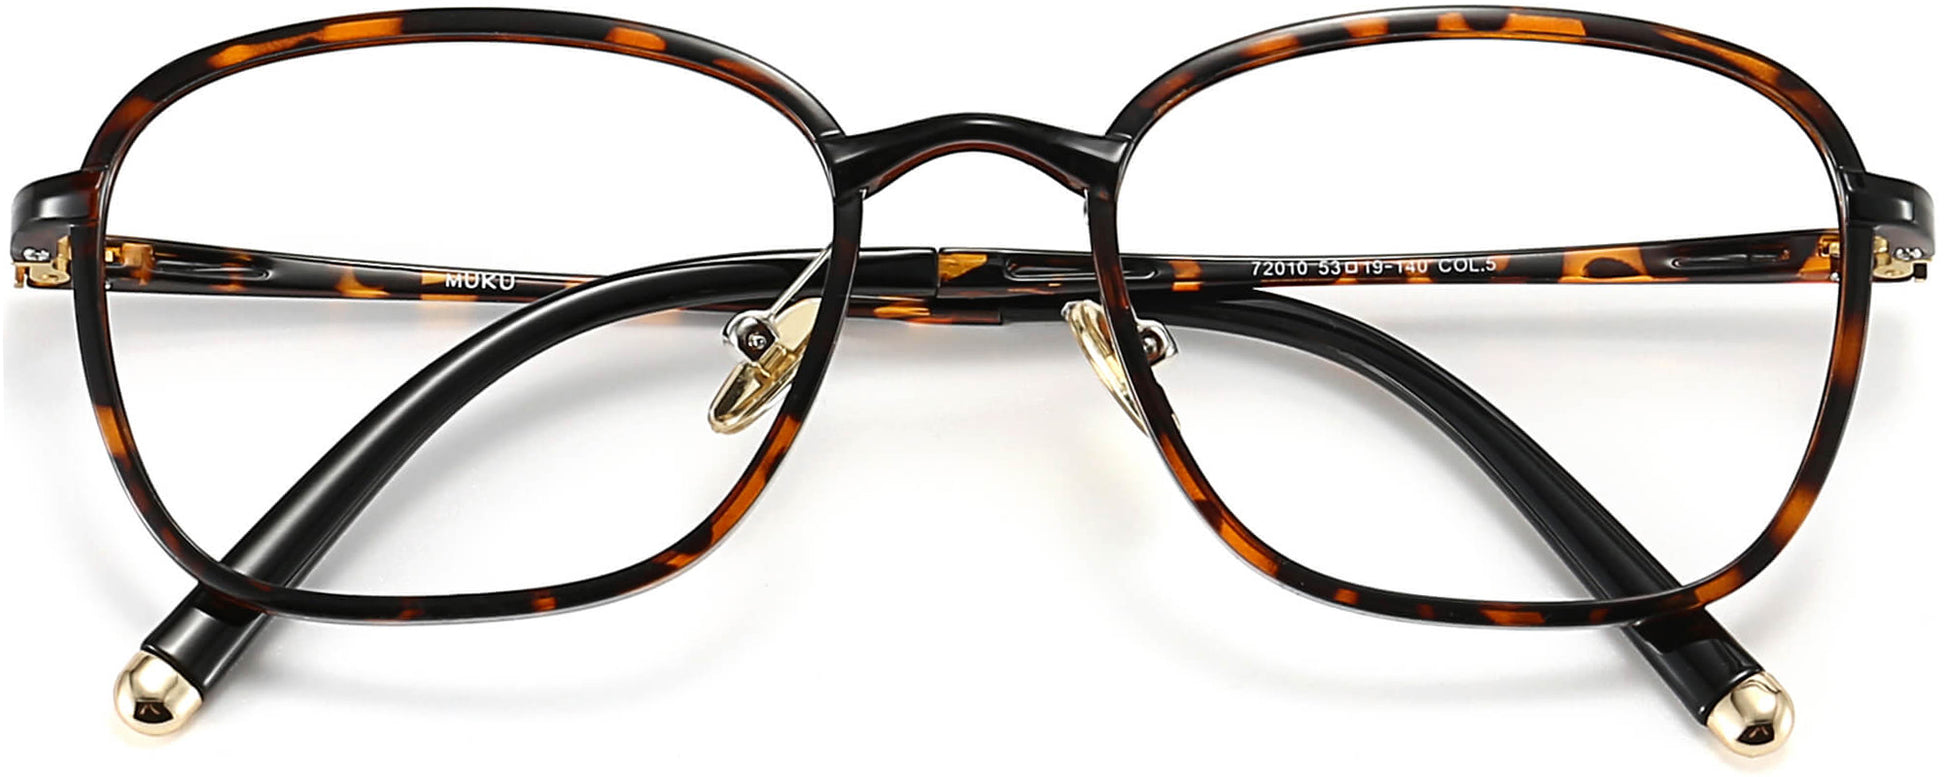 Collins Round Tortoise Eyeglasses from ANRRI, closed view